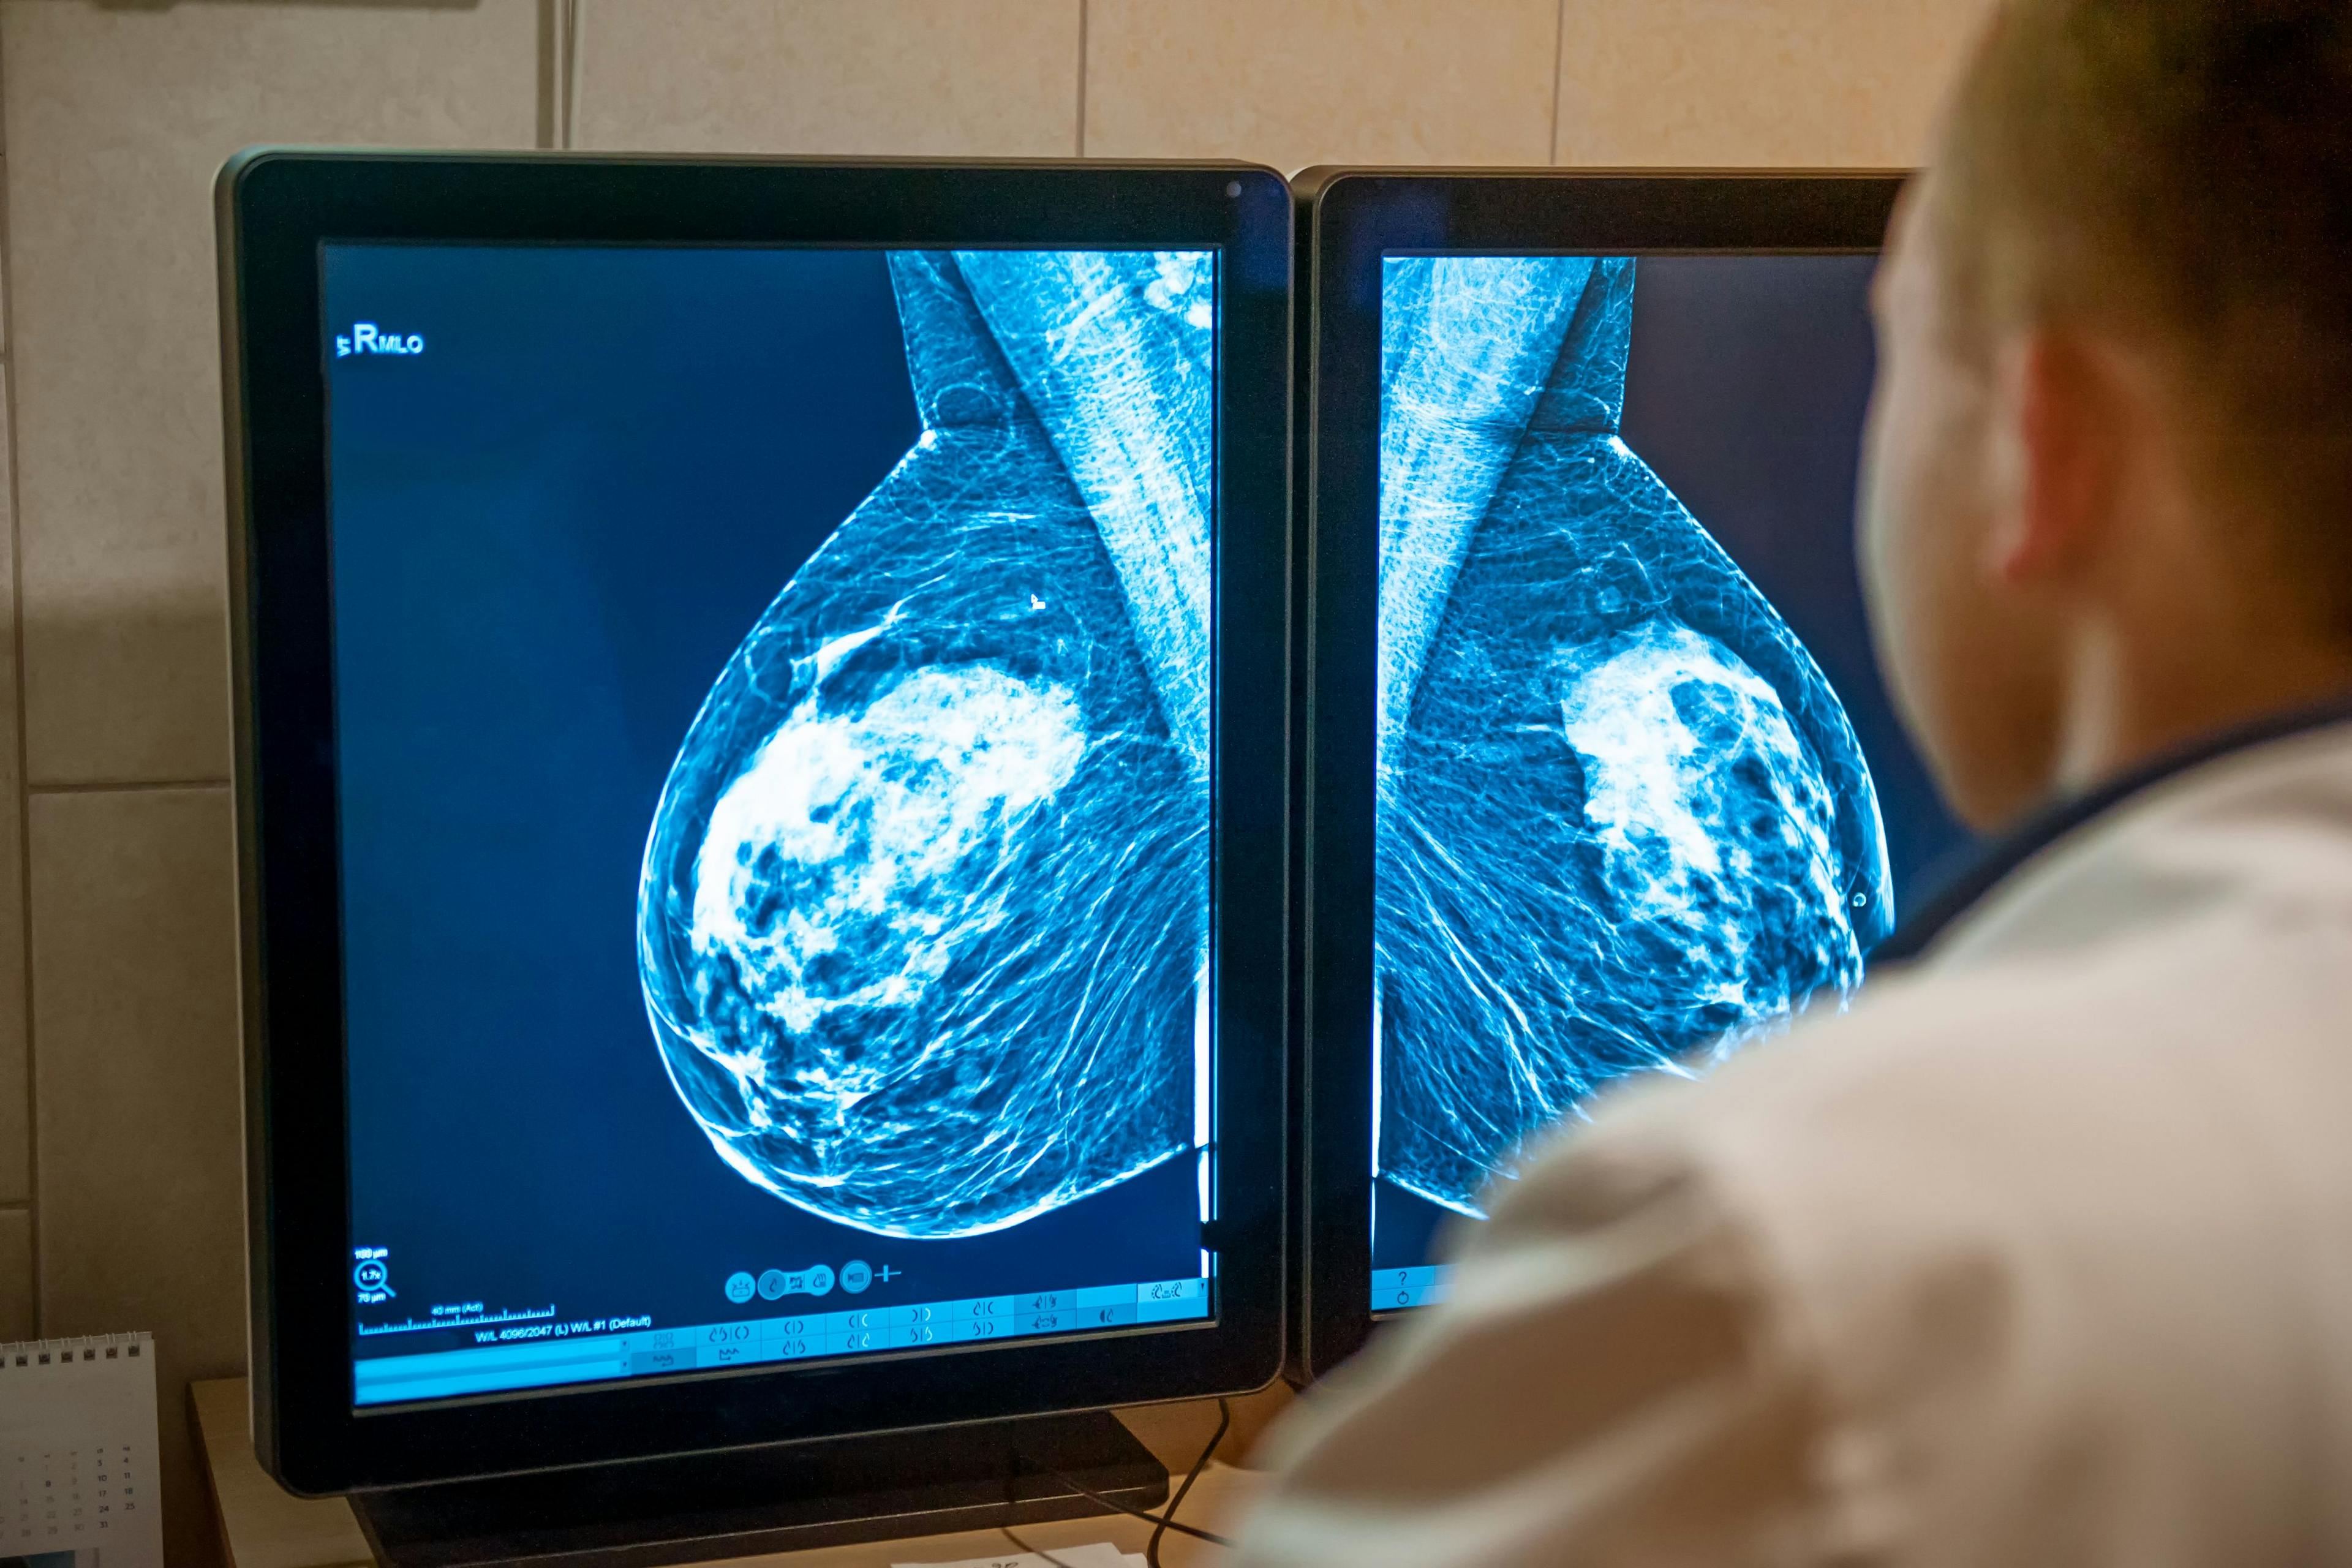 Doctor examines mammogram of patient on the monitors. | Image Credit: okrasiuk - stock.adobe.com